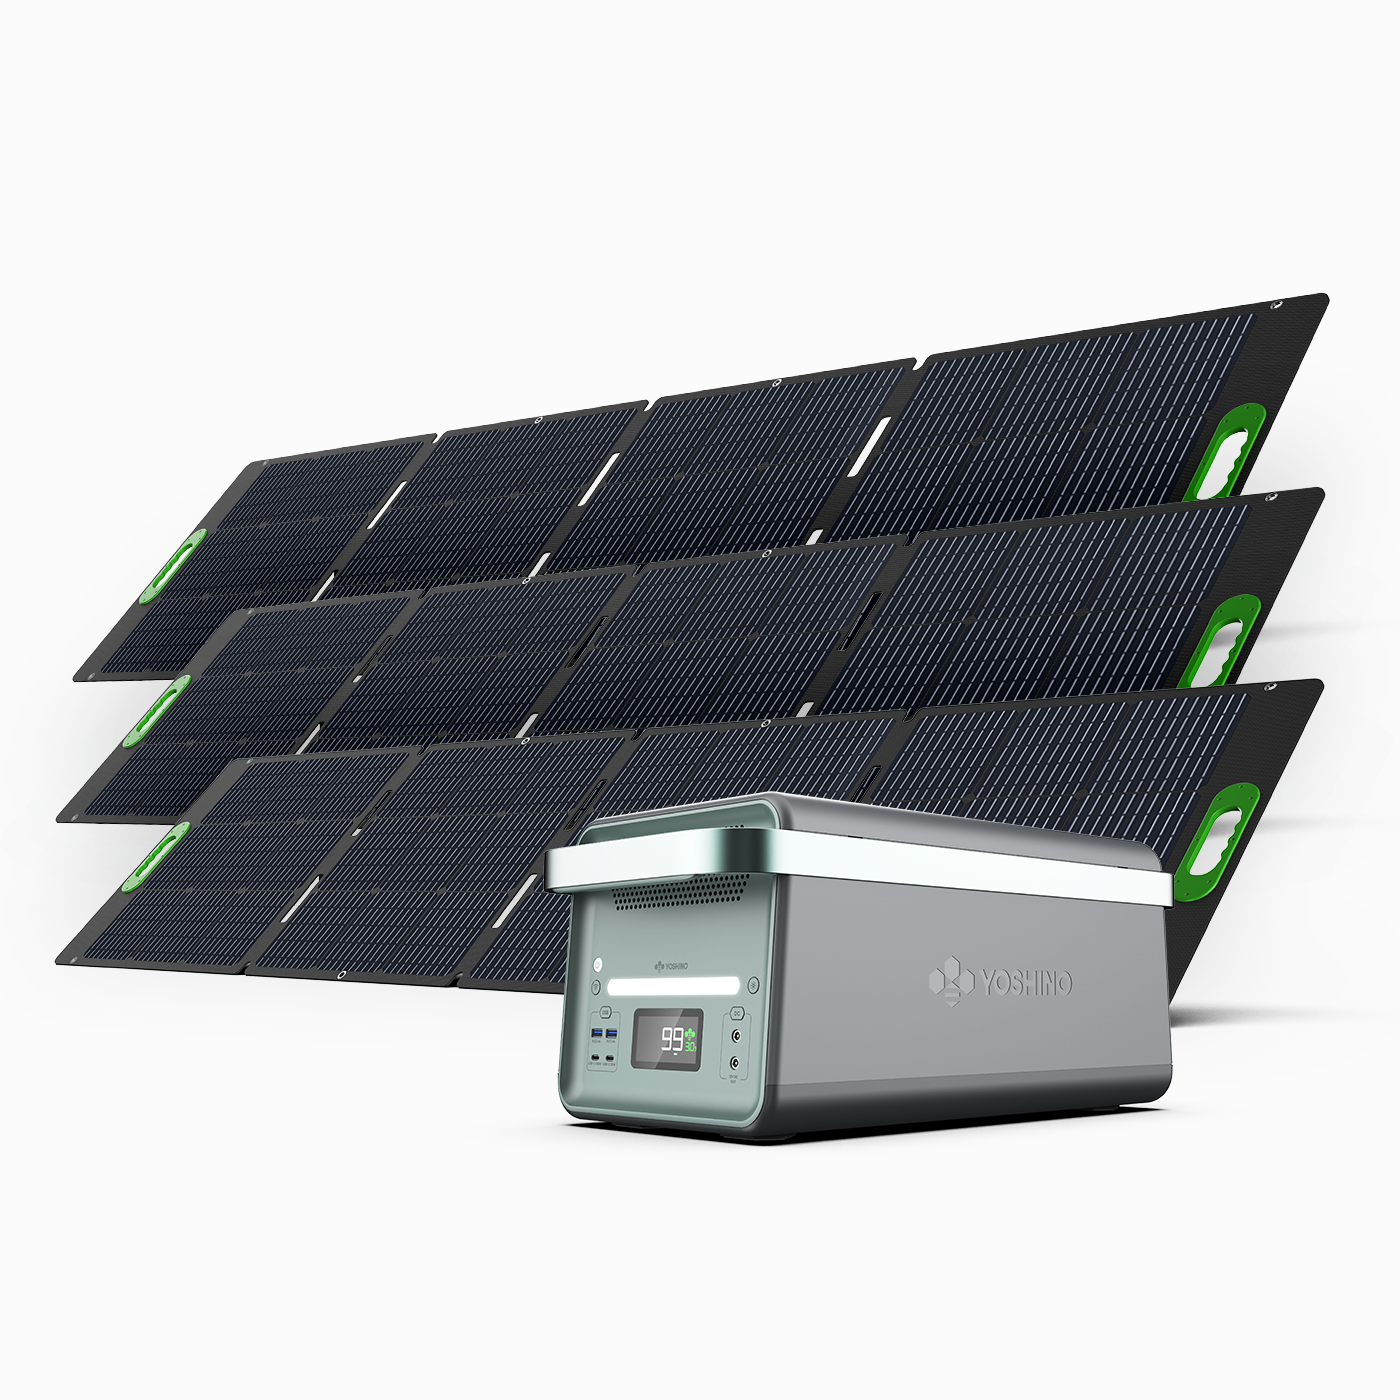 Yoshino Power K40SP23 Solid State Portable Solar Generator - Angled View